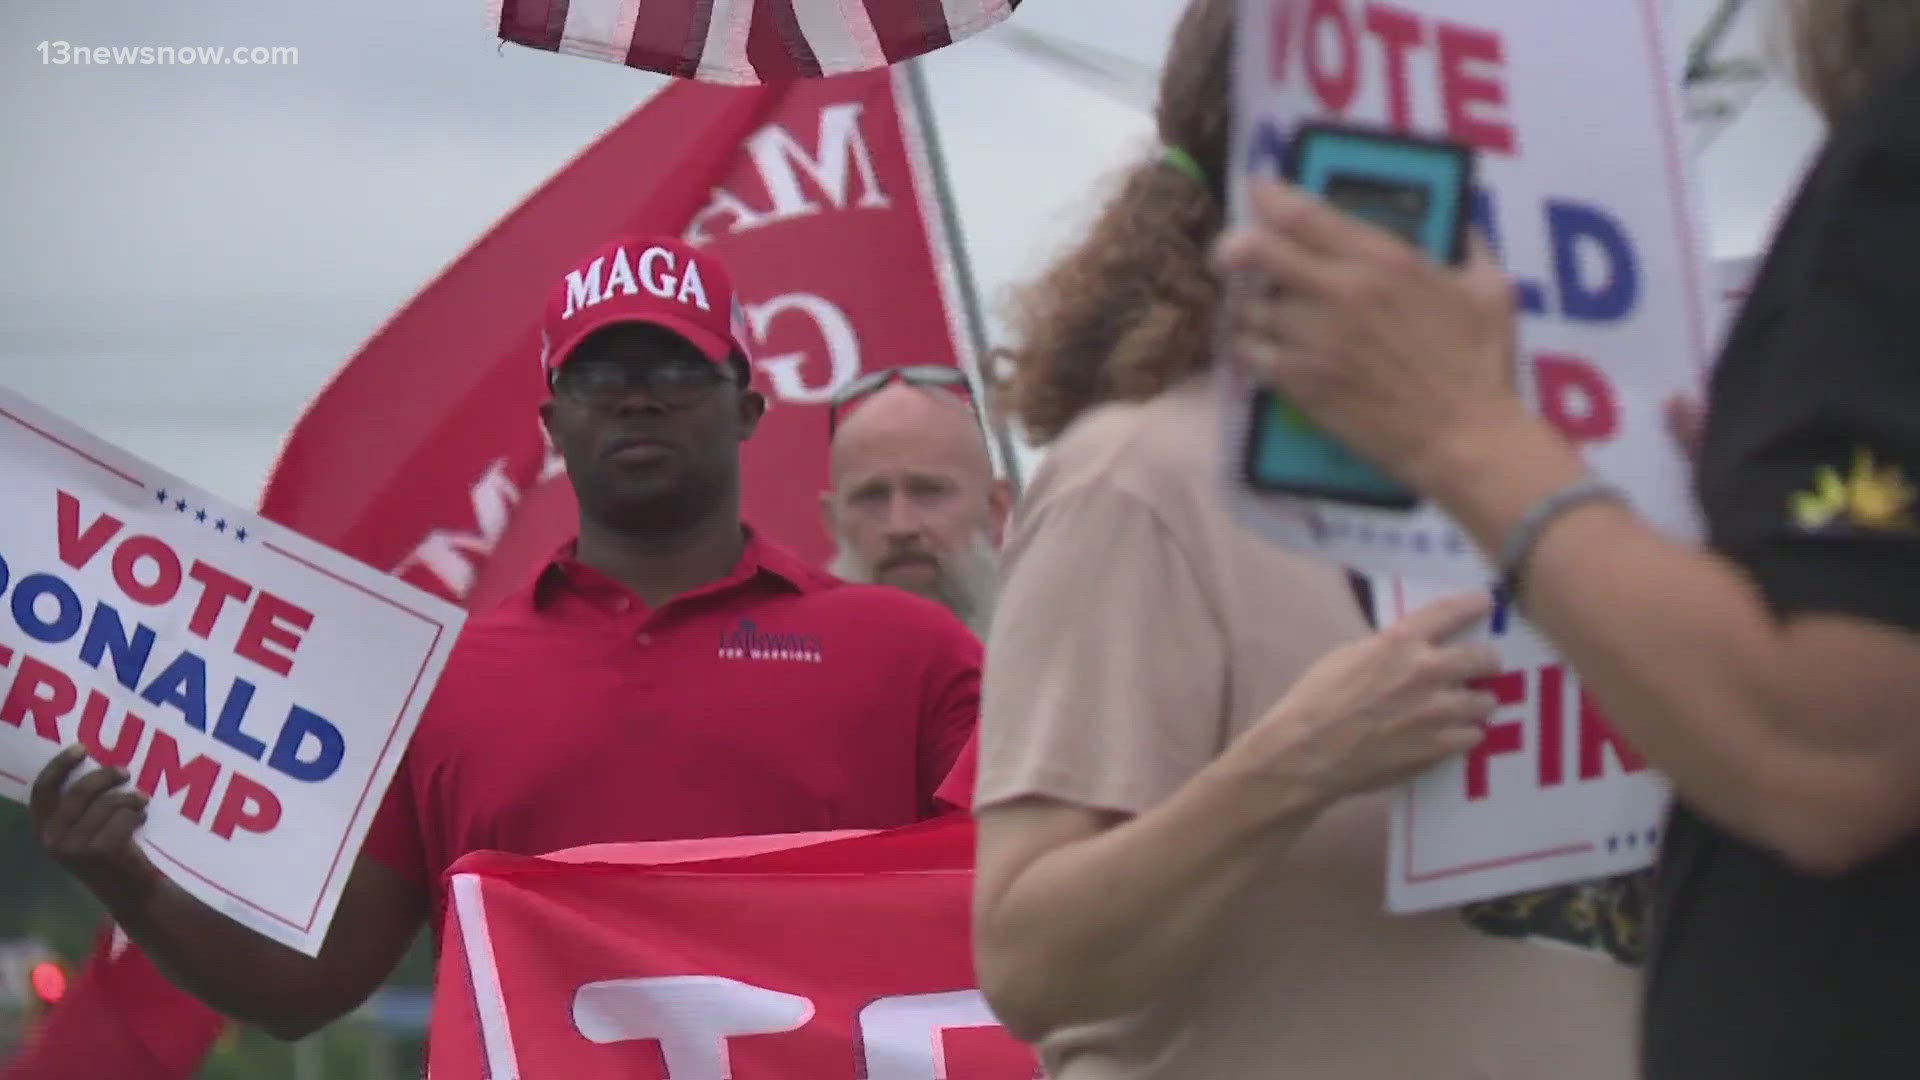 Former President Donald Trump's supporters made their presence known as first lady Jill Biden came to Virginia Beach on Thursday.